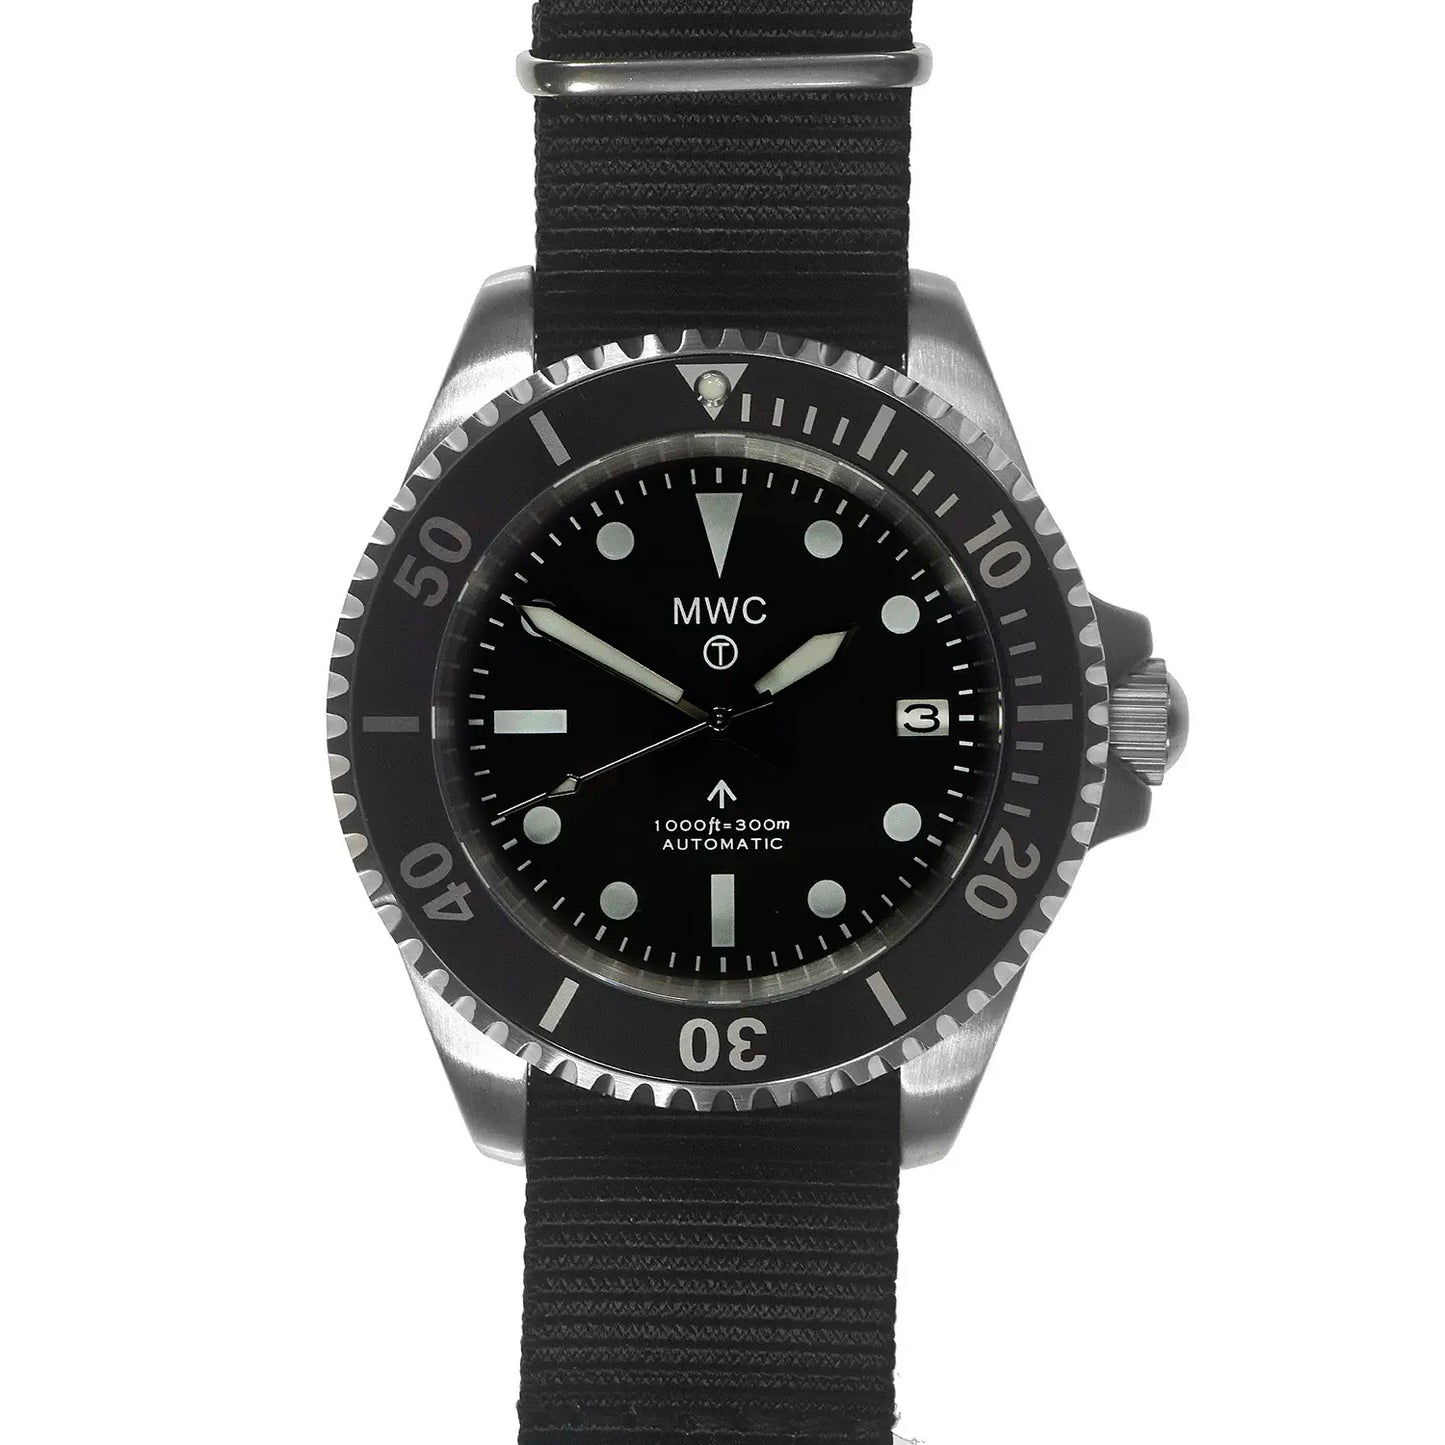 1982 Pattern Military Diver